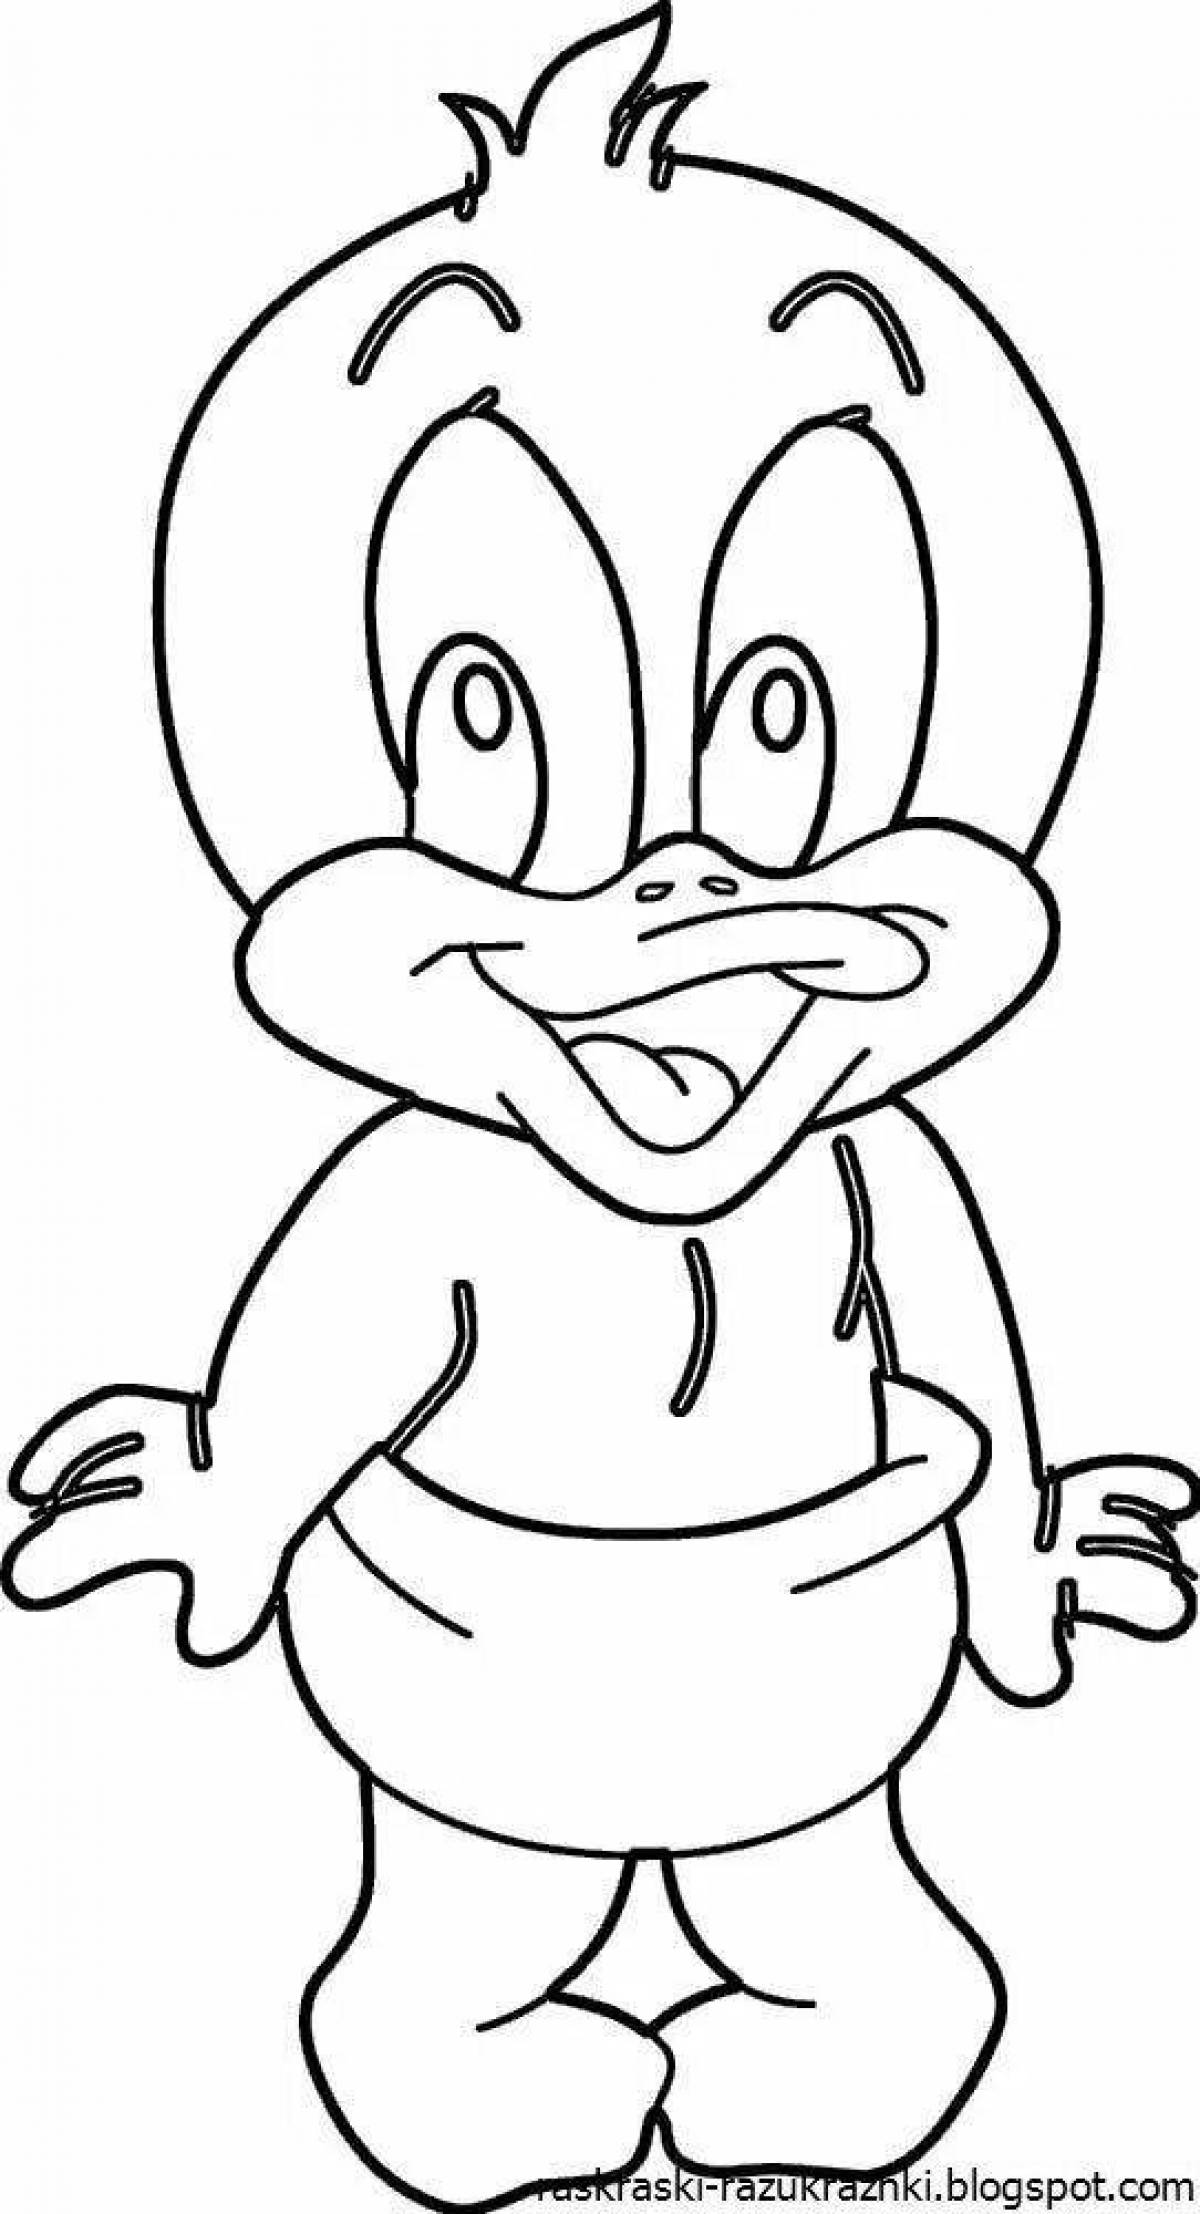 Funny cartoon character coloring page